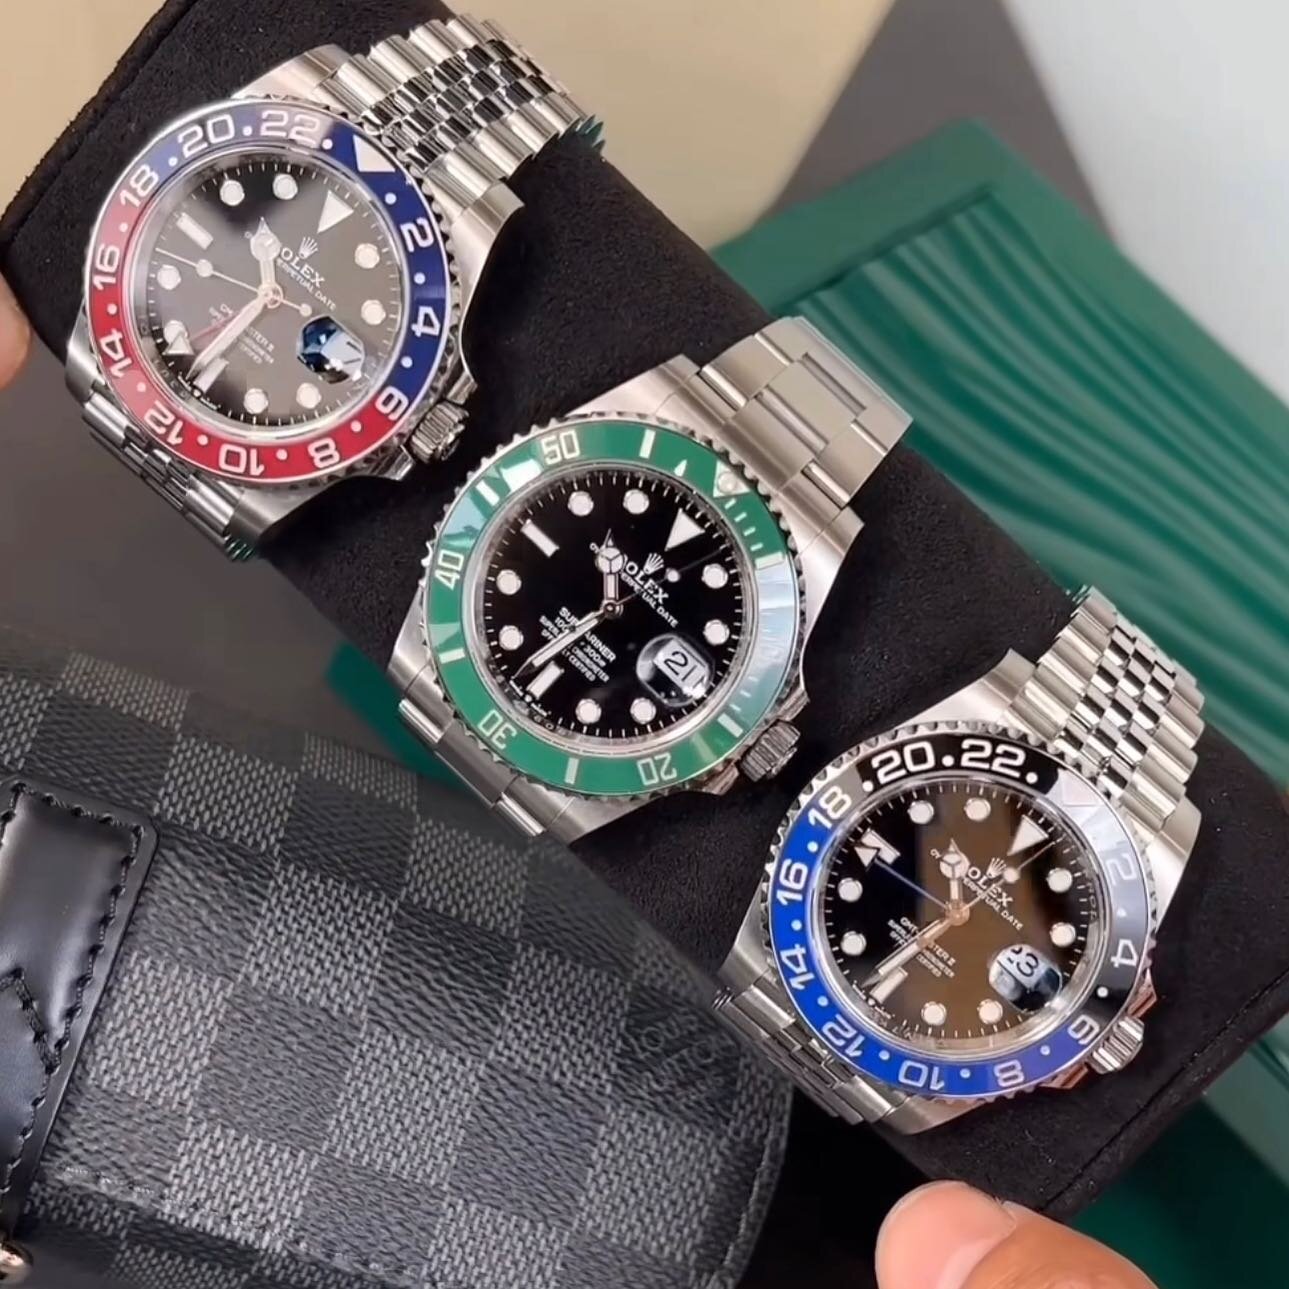 🌟 1, 2, or 3? Comment below! 
#rolex #oysterperpetual #watches